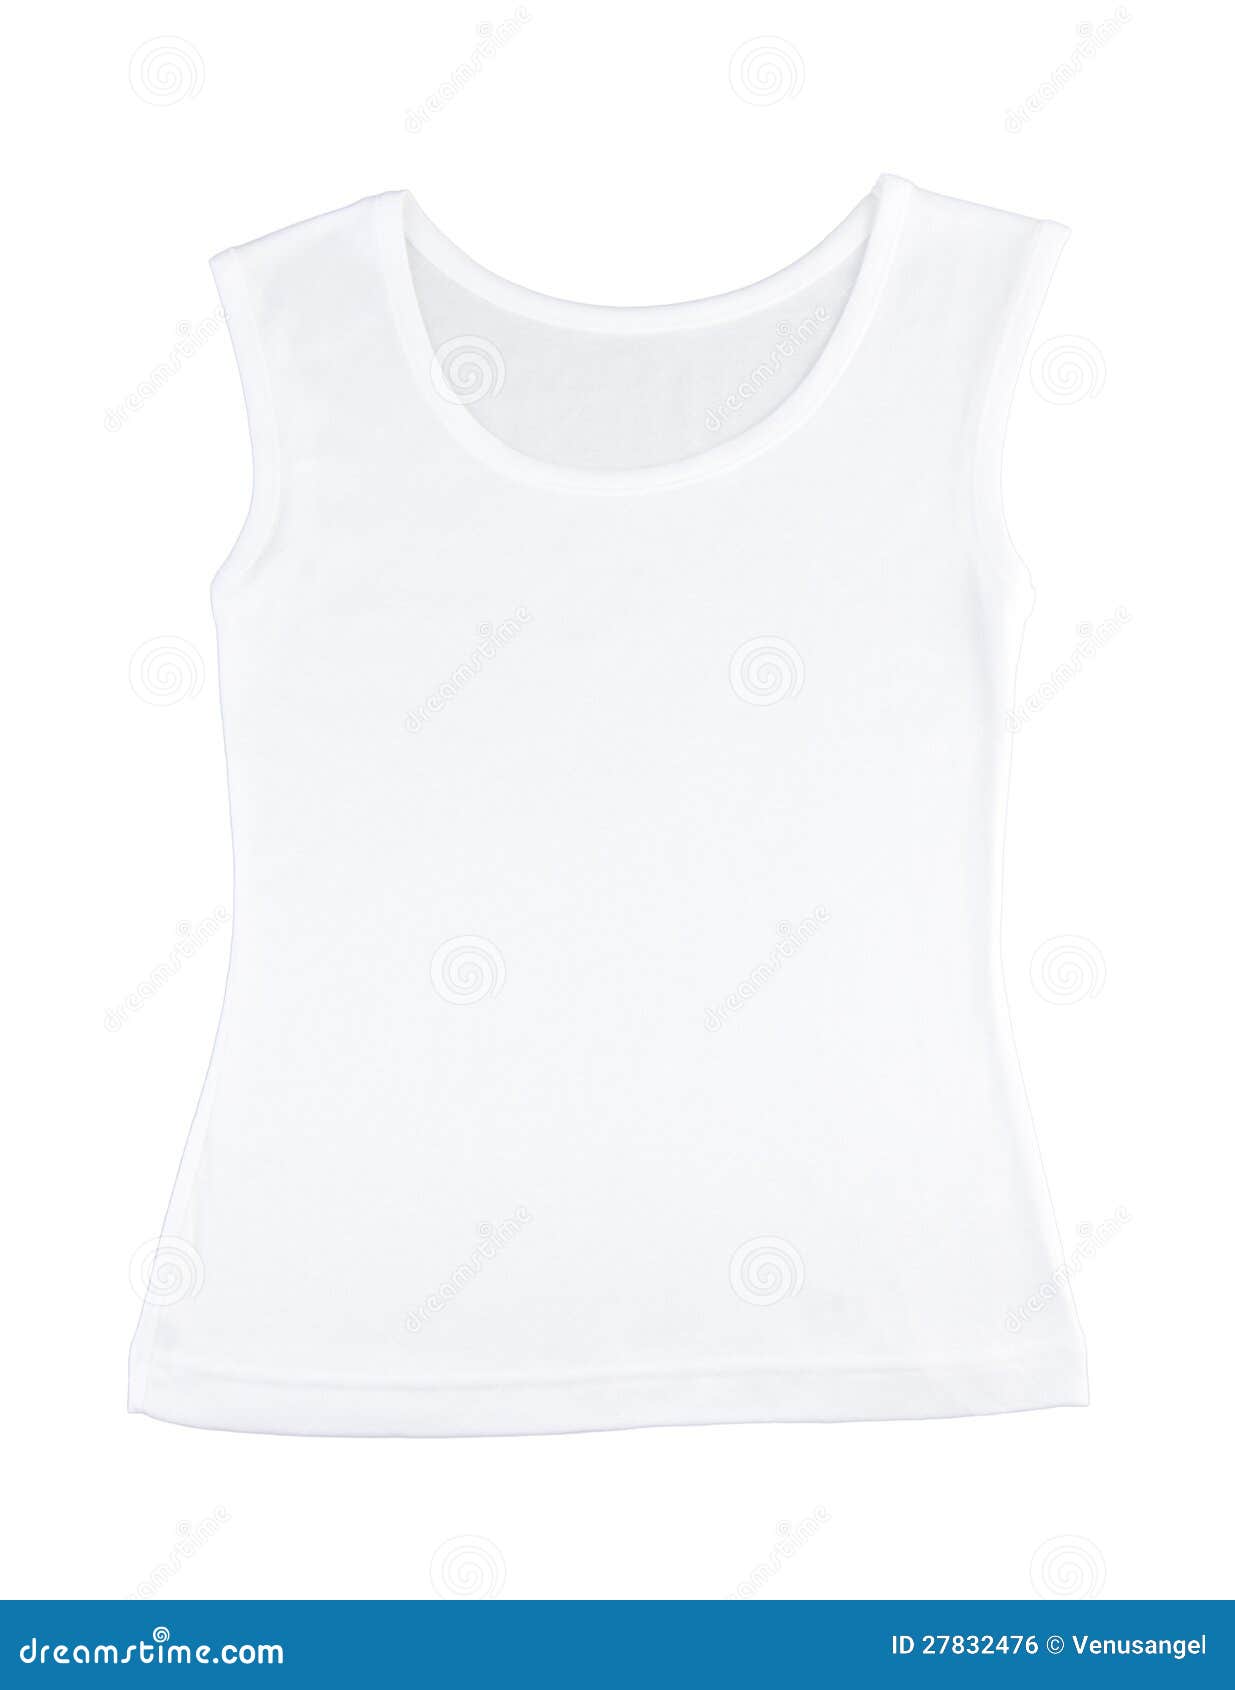 Casual white singlet stock photo. Image of paths, shirt - 27832476